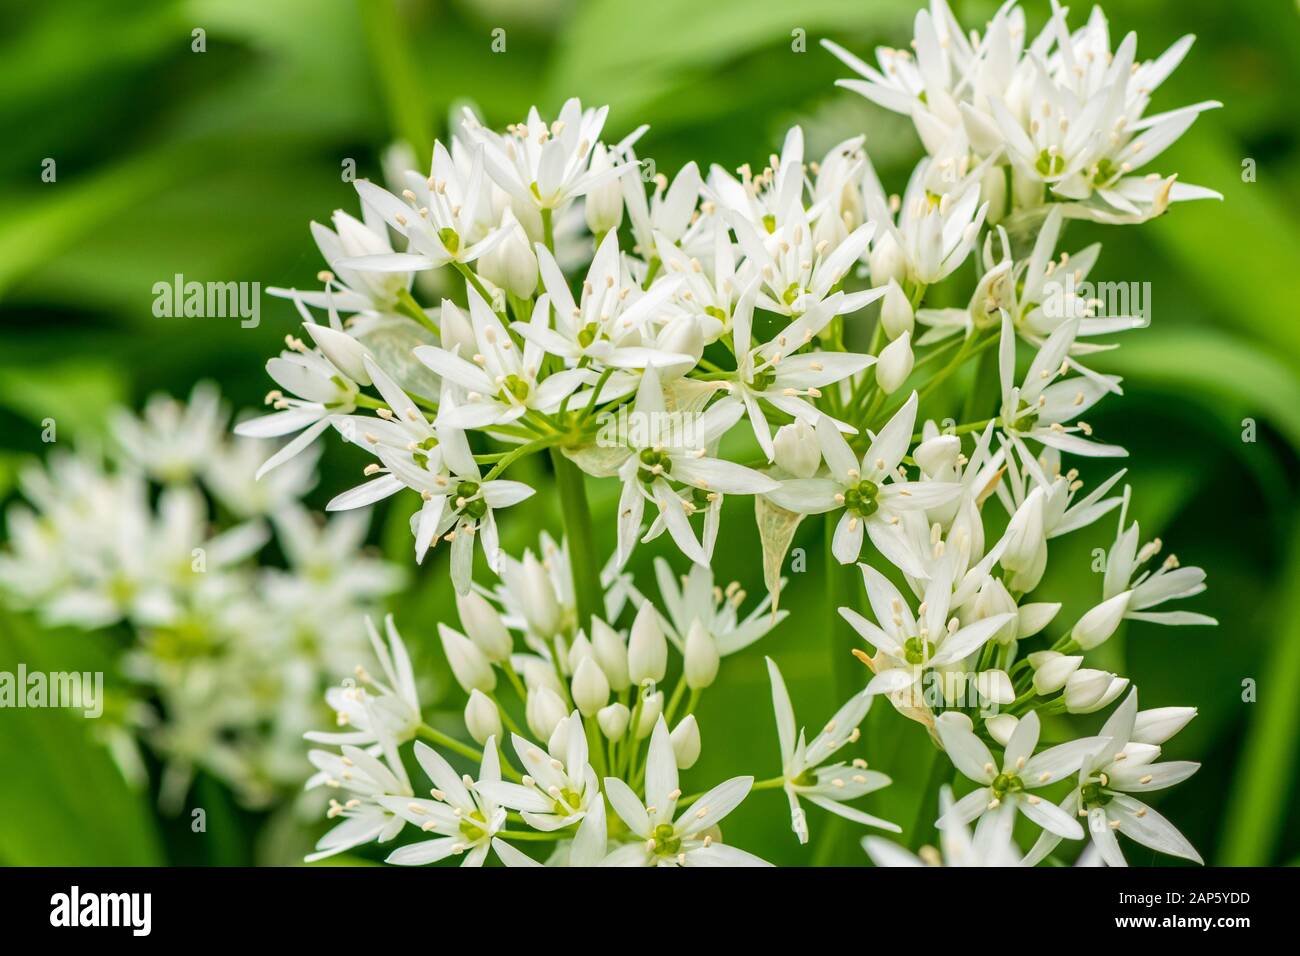 Close up of starry white florets on the umbels of Allium ursinum, wild garlic growing in woodland Stock Photo